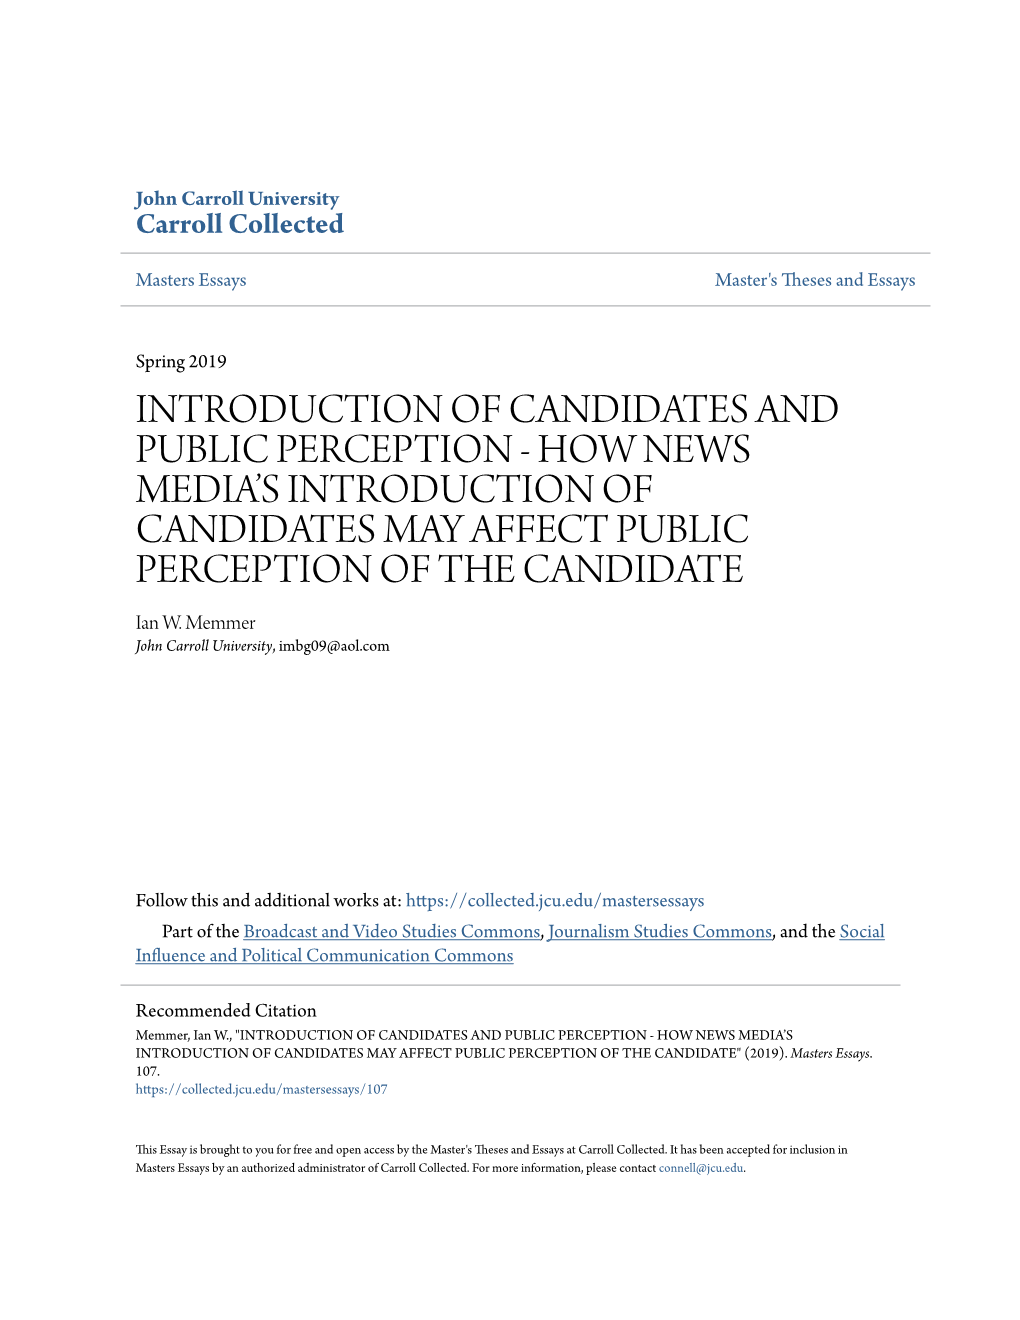 INTRODUCTION of CANDIDATES and PUBLIC PERCEPTION - HOW NEWS MEDIA’S INTRODUCTION of CANDIDATES MAY AFFECT PUBLIC PERCEPTION of the CANDIDATE Ian W